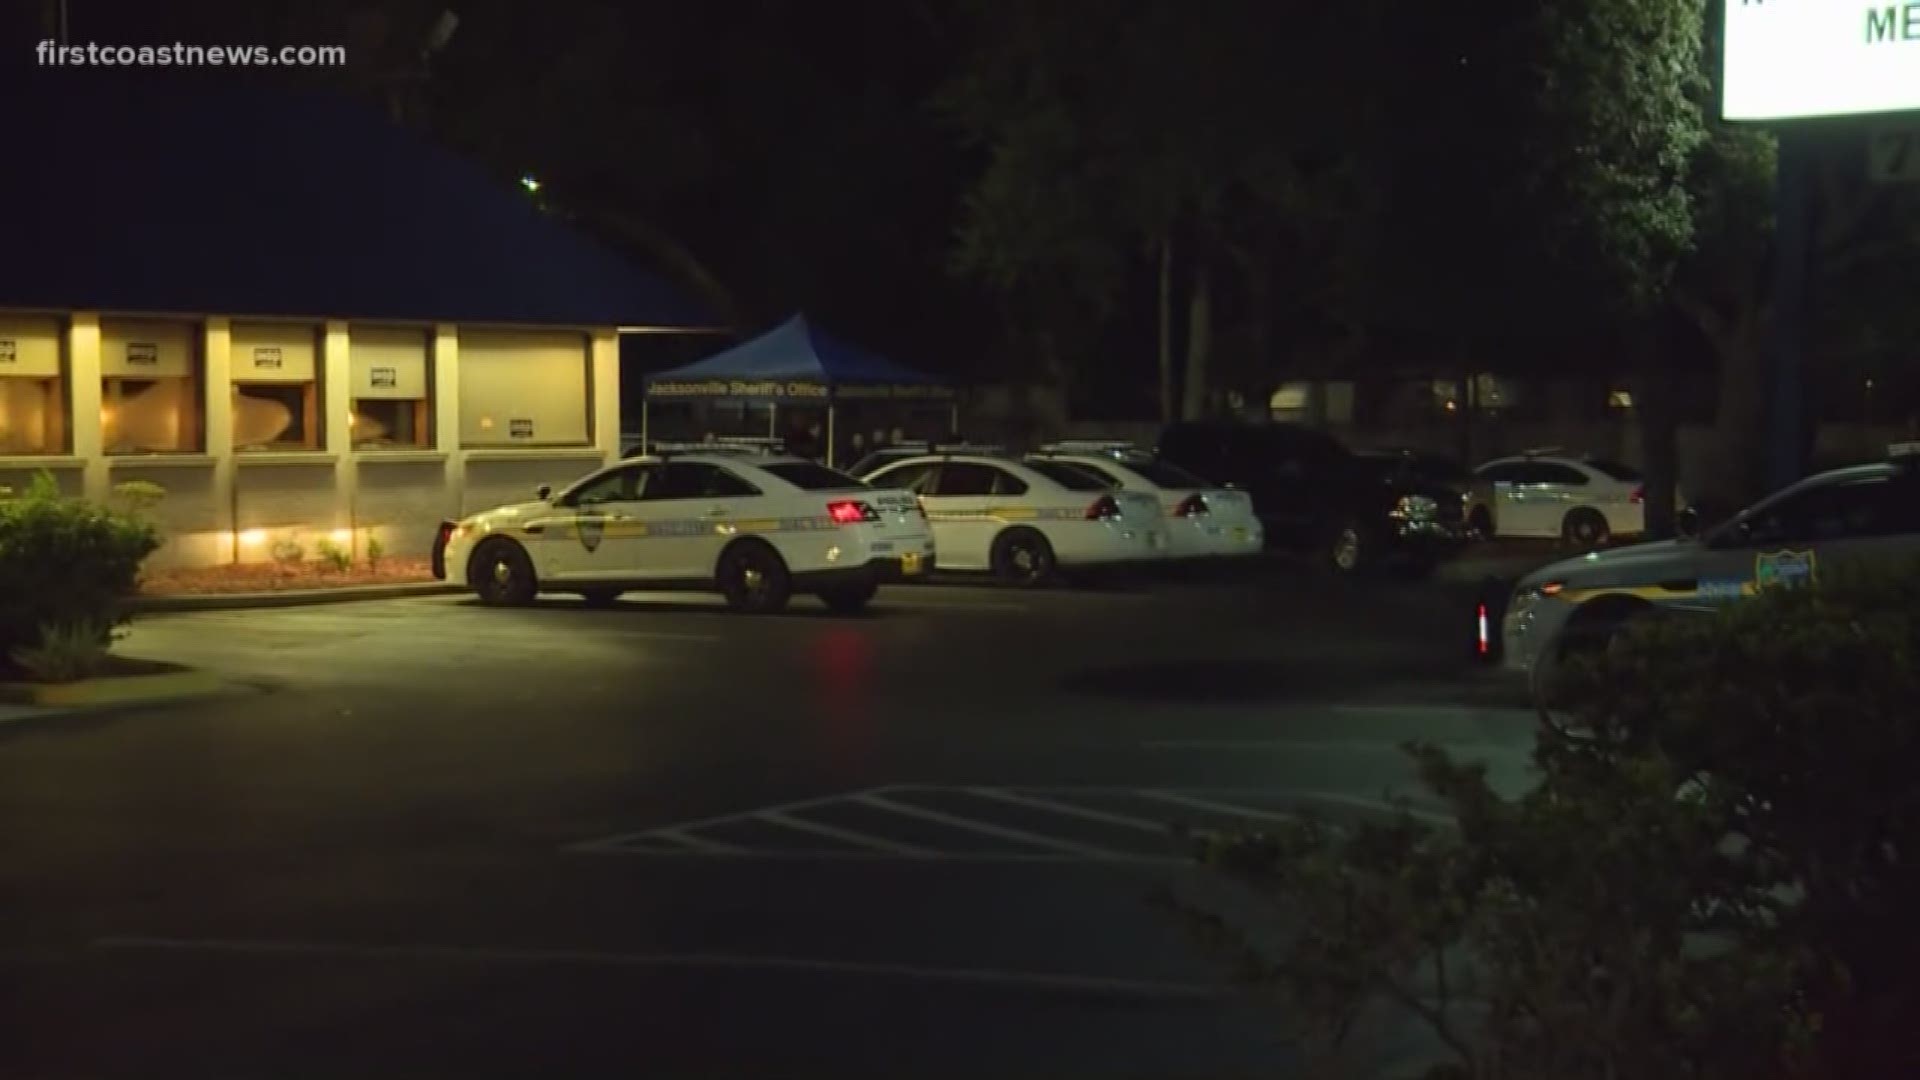 JSO has not revealed what crime officers are investigating, but officers are posted less than a mile from where a 7-year-old child was shot and killed by a stray bullet during a shootout.